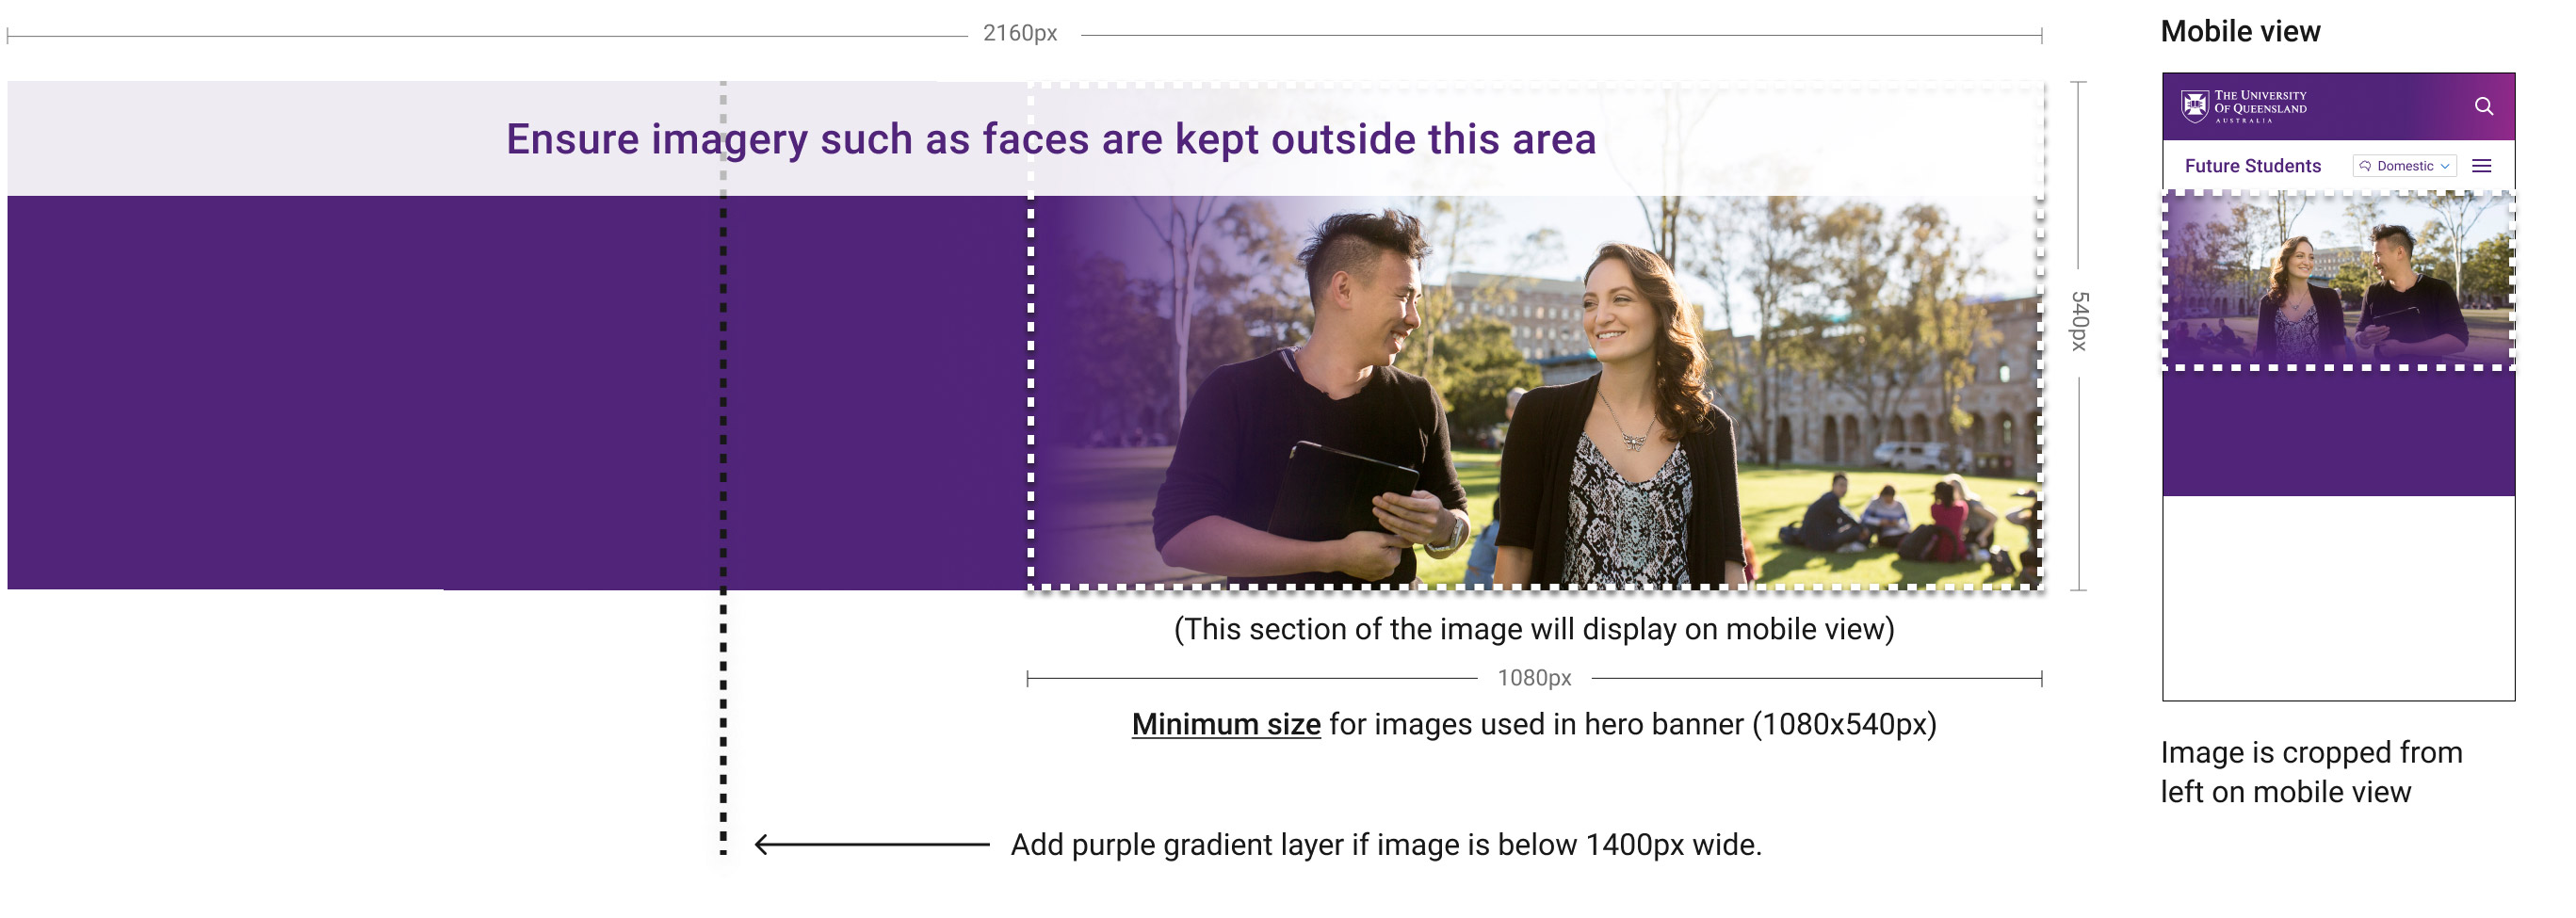 On desktop, the image is positioned at the right of the banner. Its left edge is overlaid by a purple gradient, which transitions to a purple background that covers the rest of the banner. On mobile the image is cropped from the left and sits above the purple background